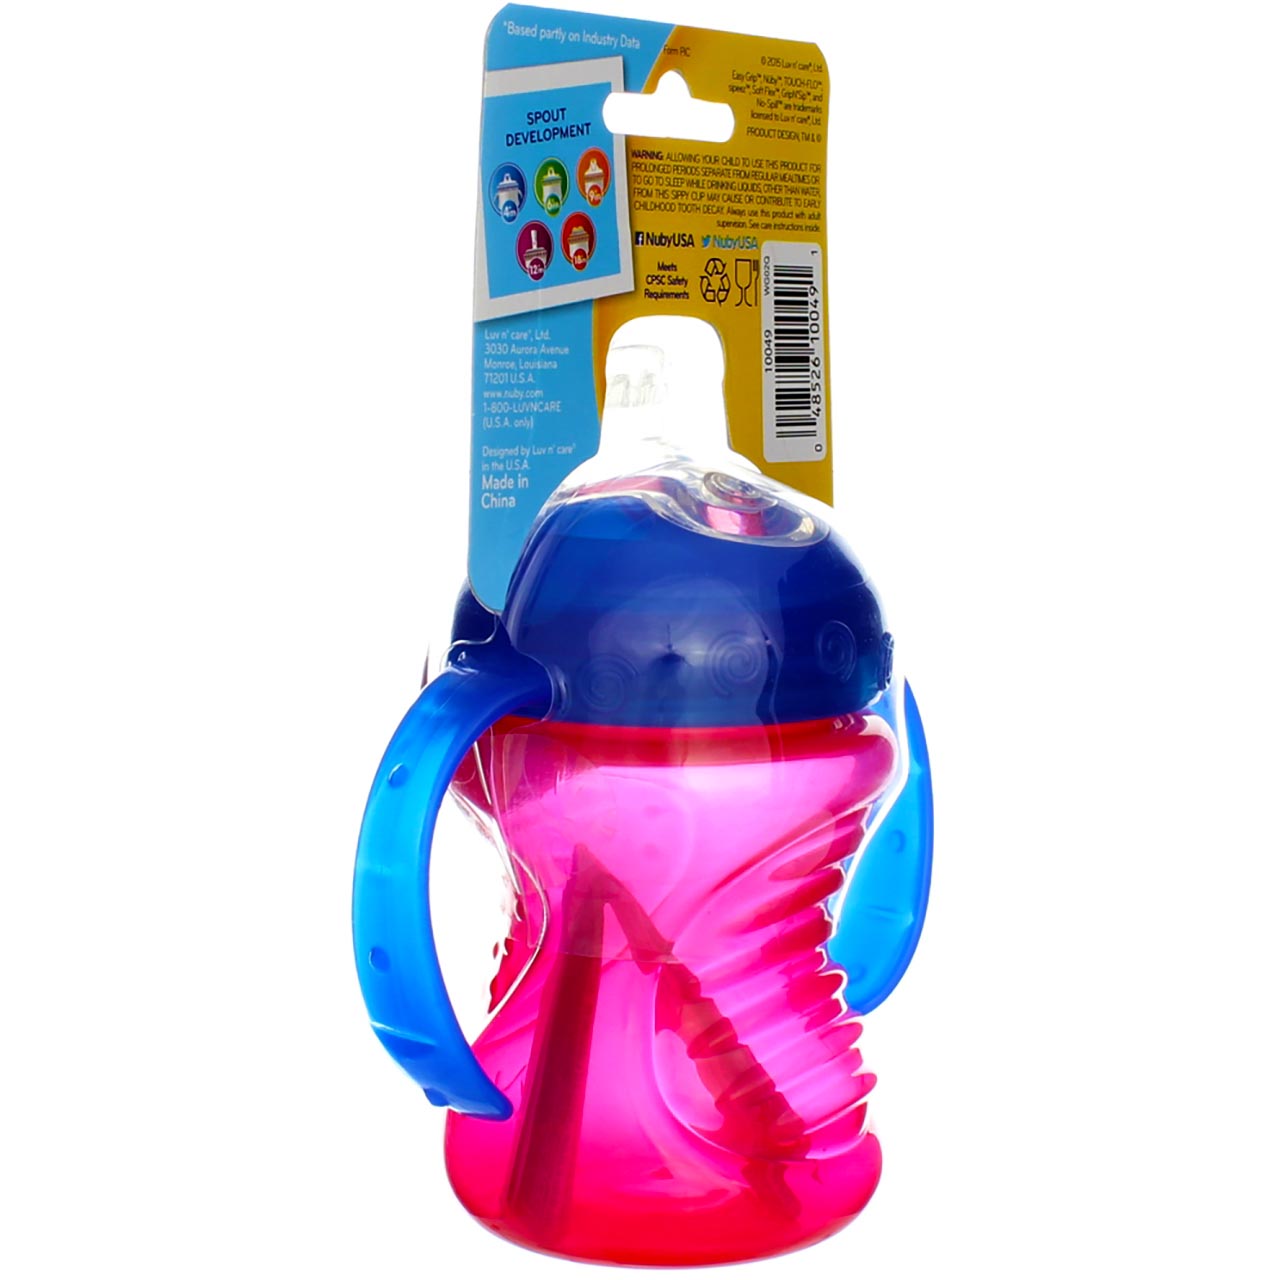 Nuby Grip N Sip Super Spout Sippy Cup with Handles, 4m+, 8 oz - image 4 of 4